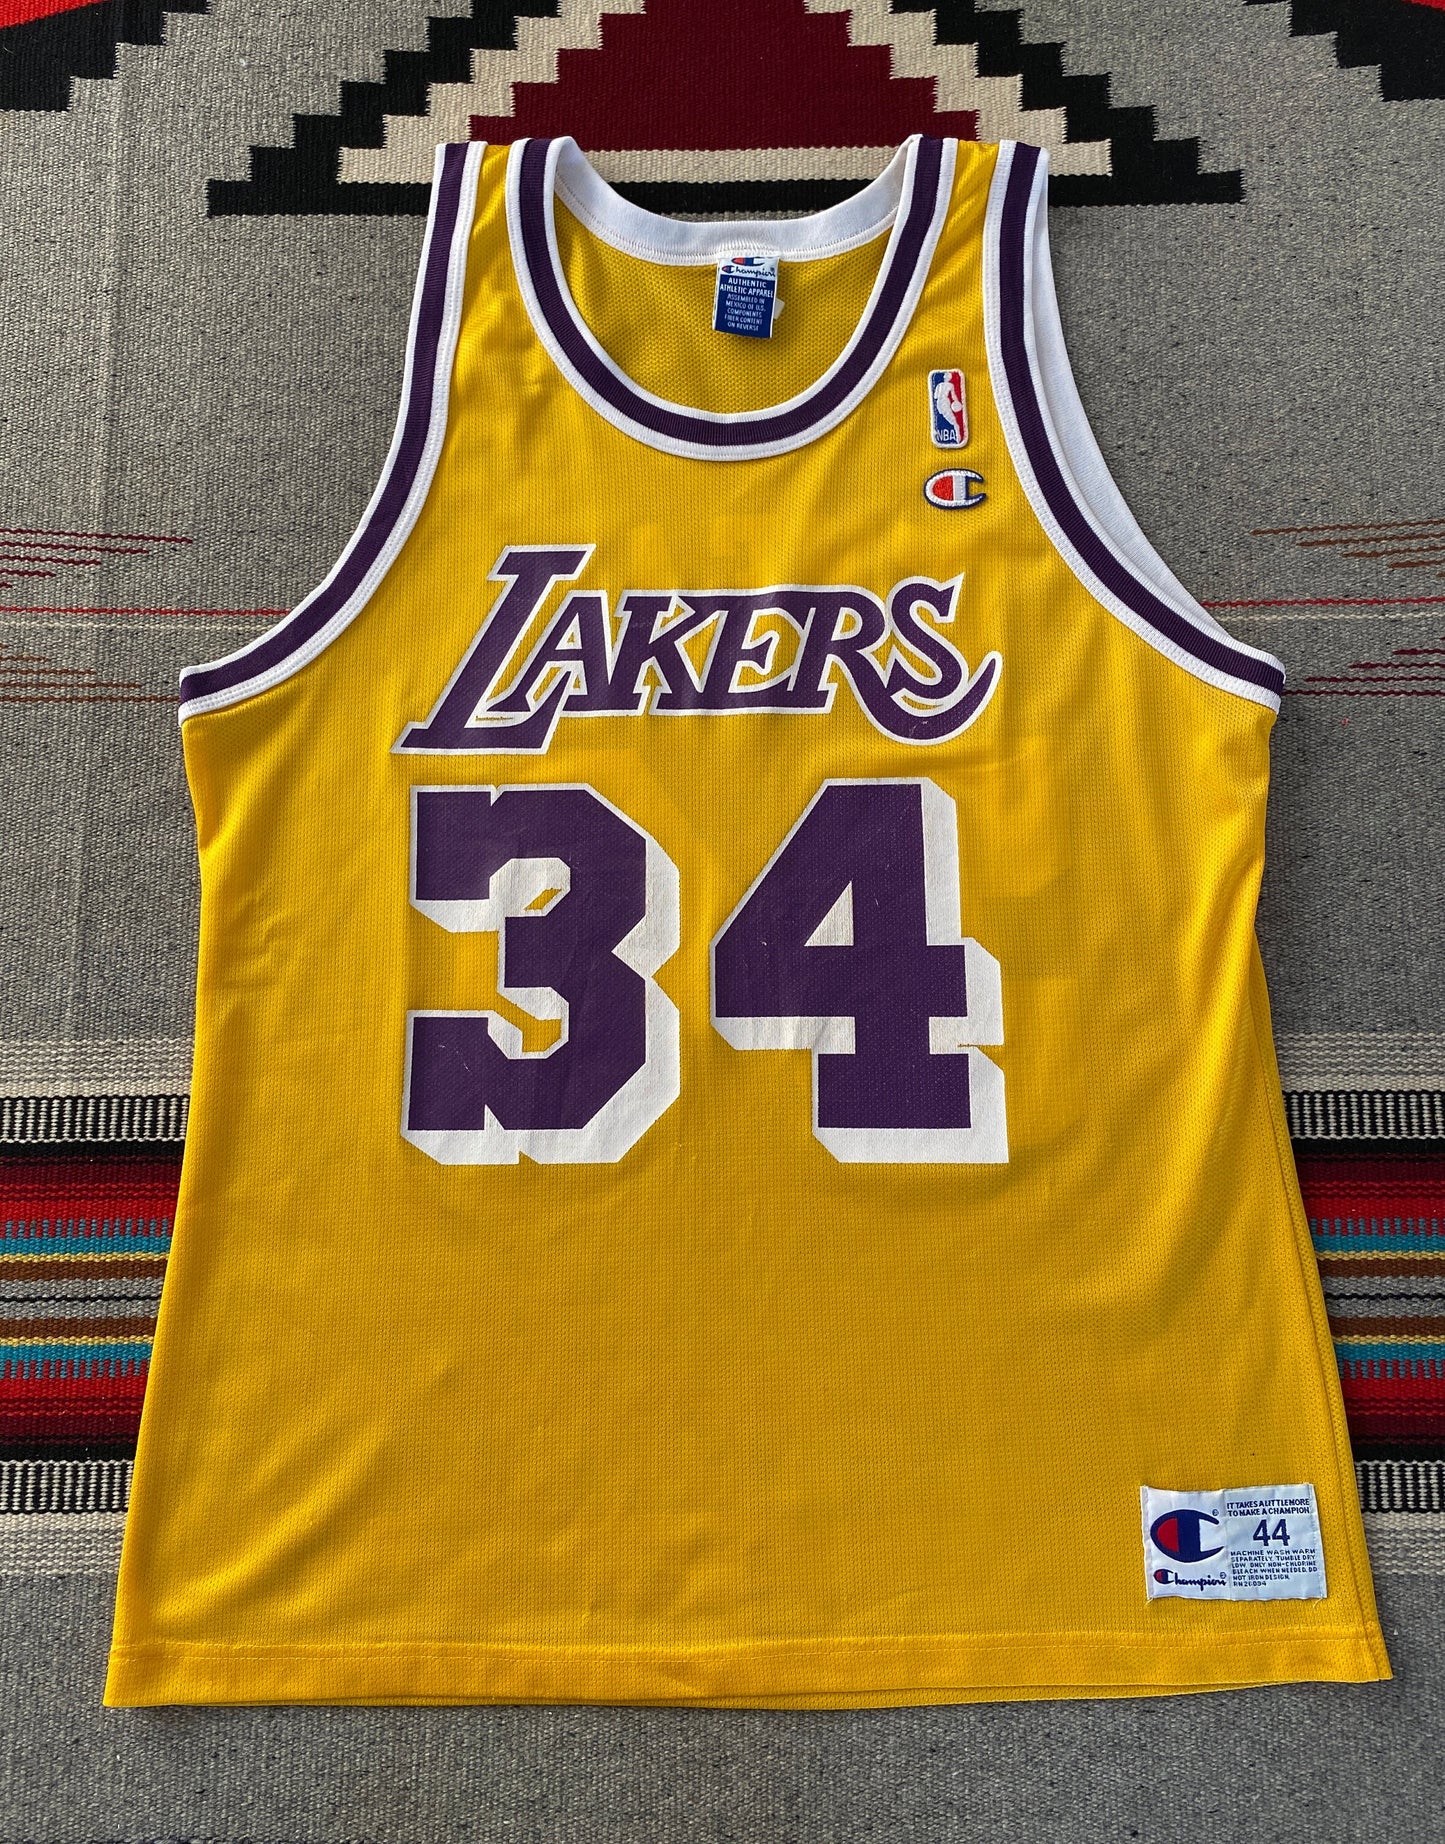 Vintage NBA Champion jersey LA Lakers with player O'Neal #34, size 44 - front view.